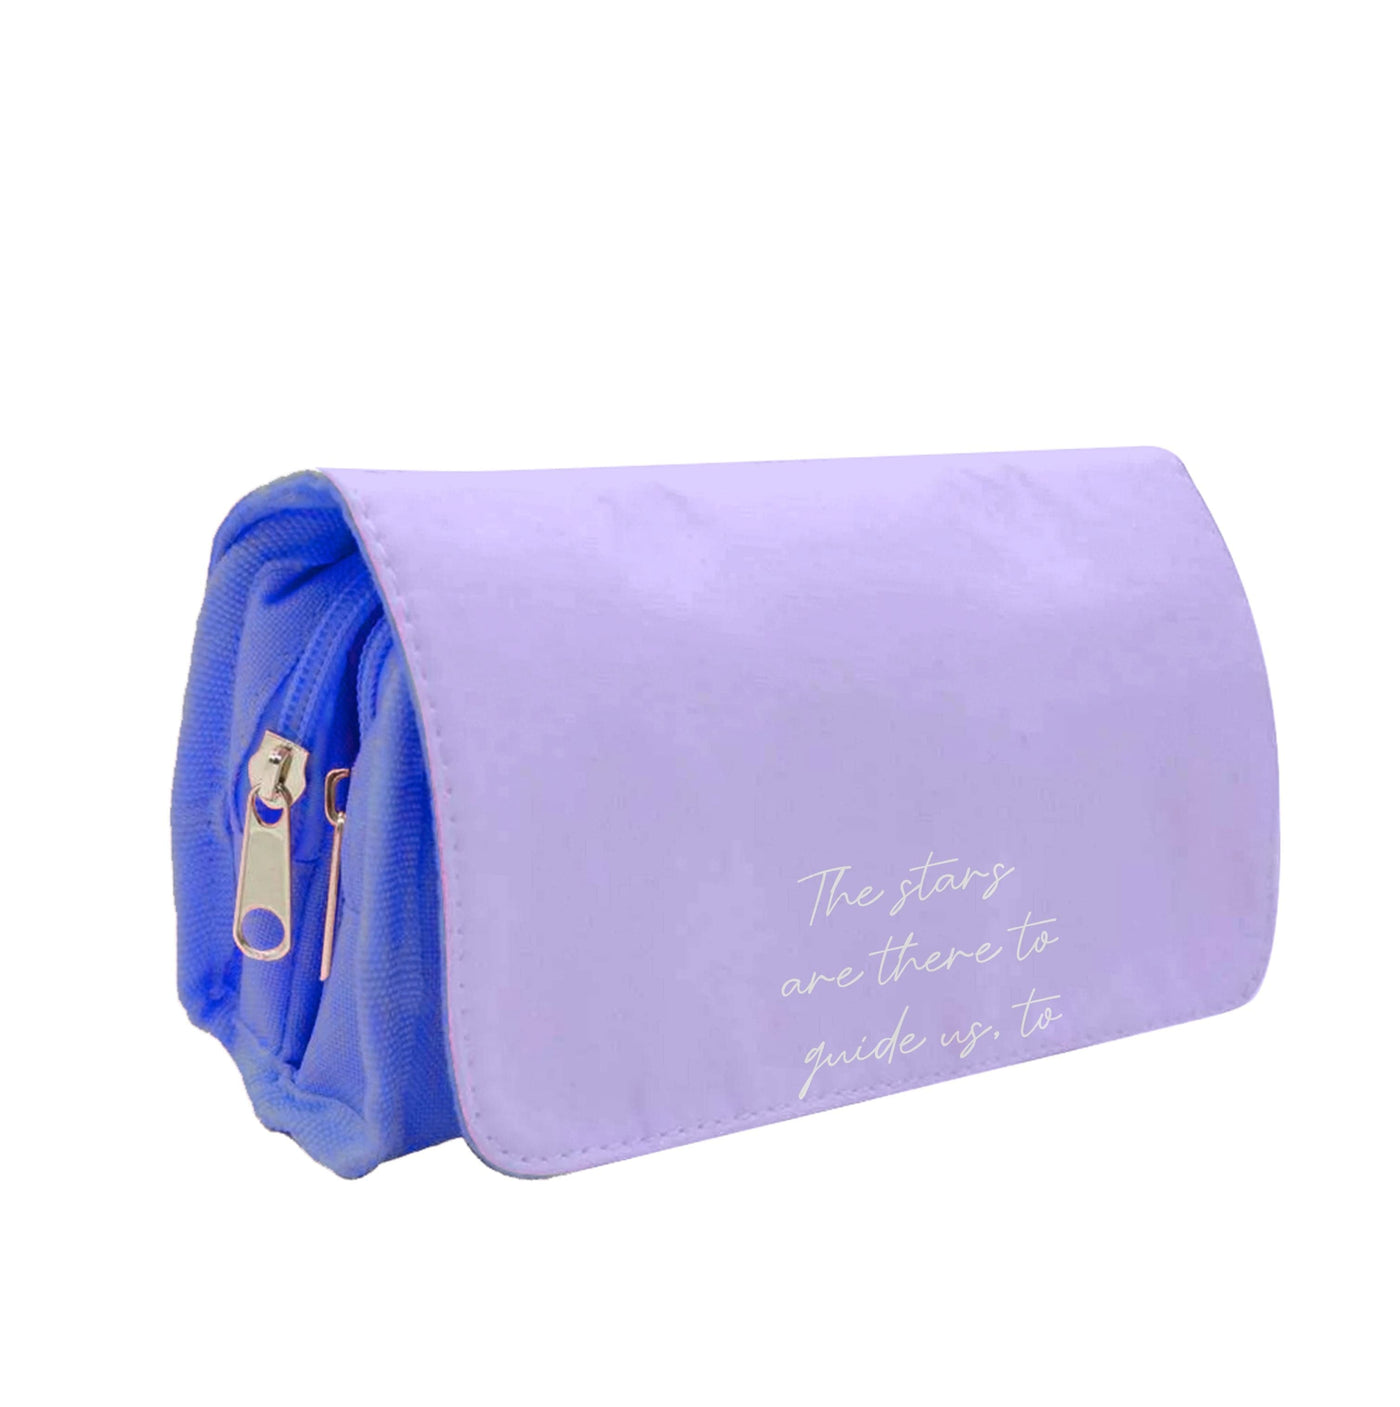 The Stars Are There To Guide Us - Wish Pencil Case